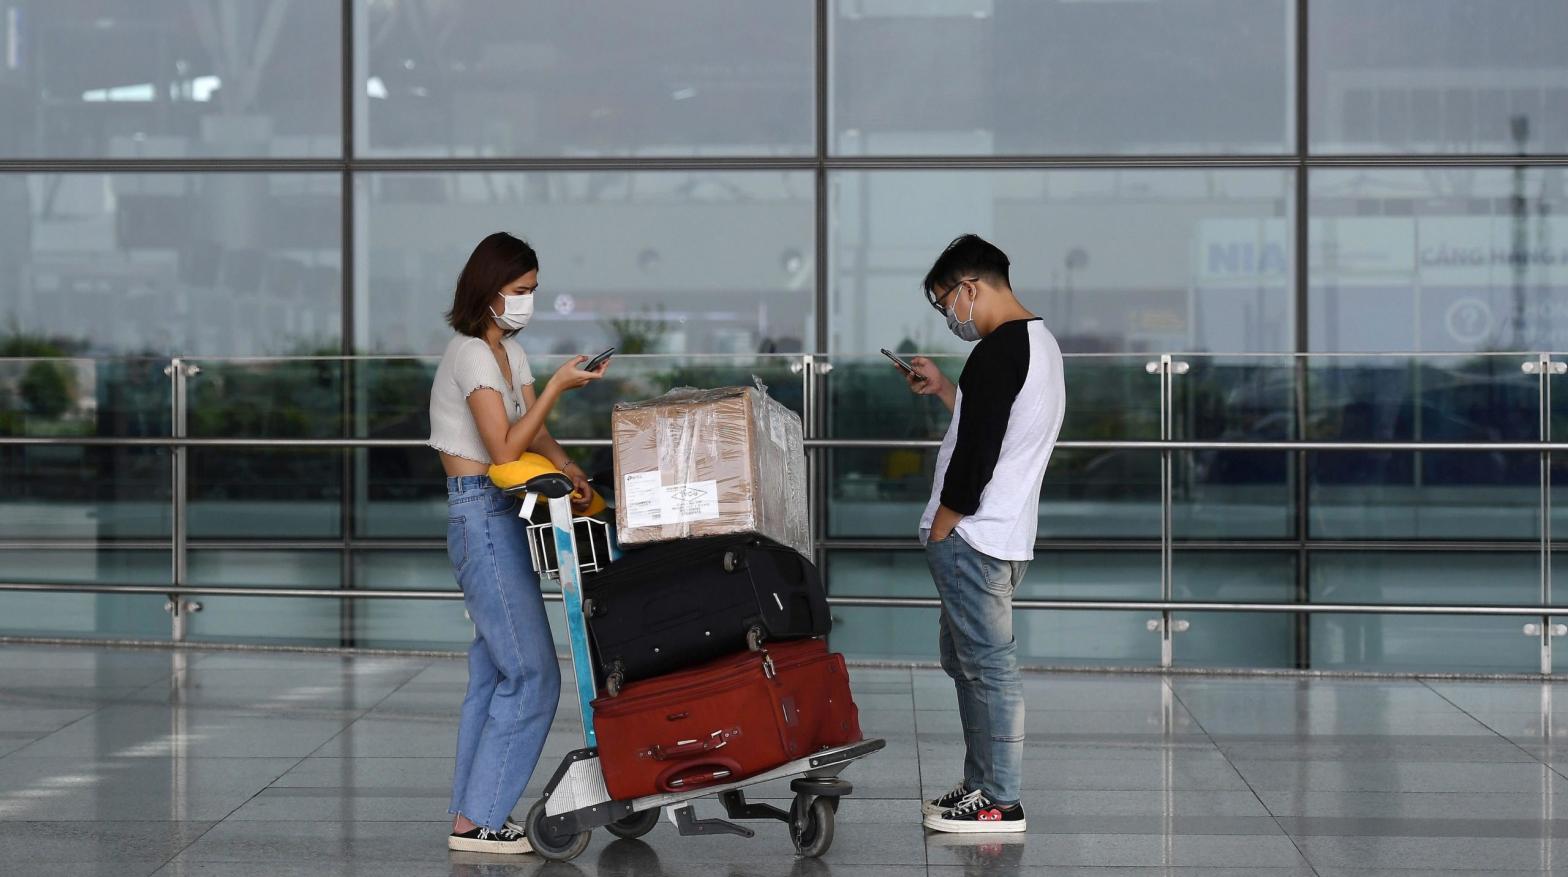 File photo of passengers standing outside the departure terminal at Noi Bai International Airport in Hanoi in 2020. (Photo: Nhac Nguyen/AFP, Getty Images)